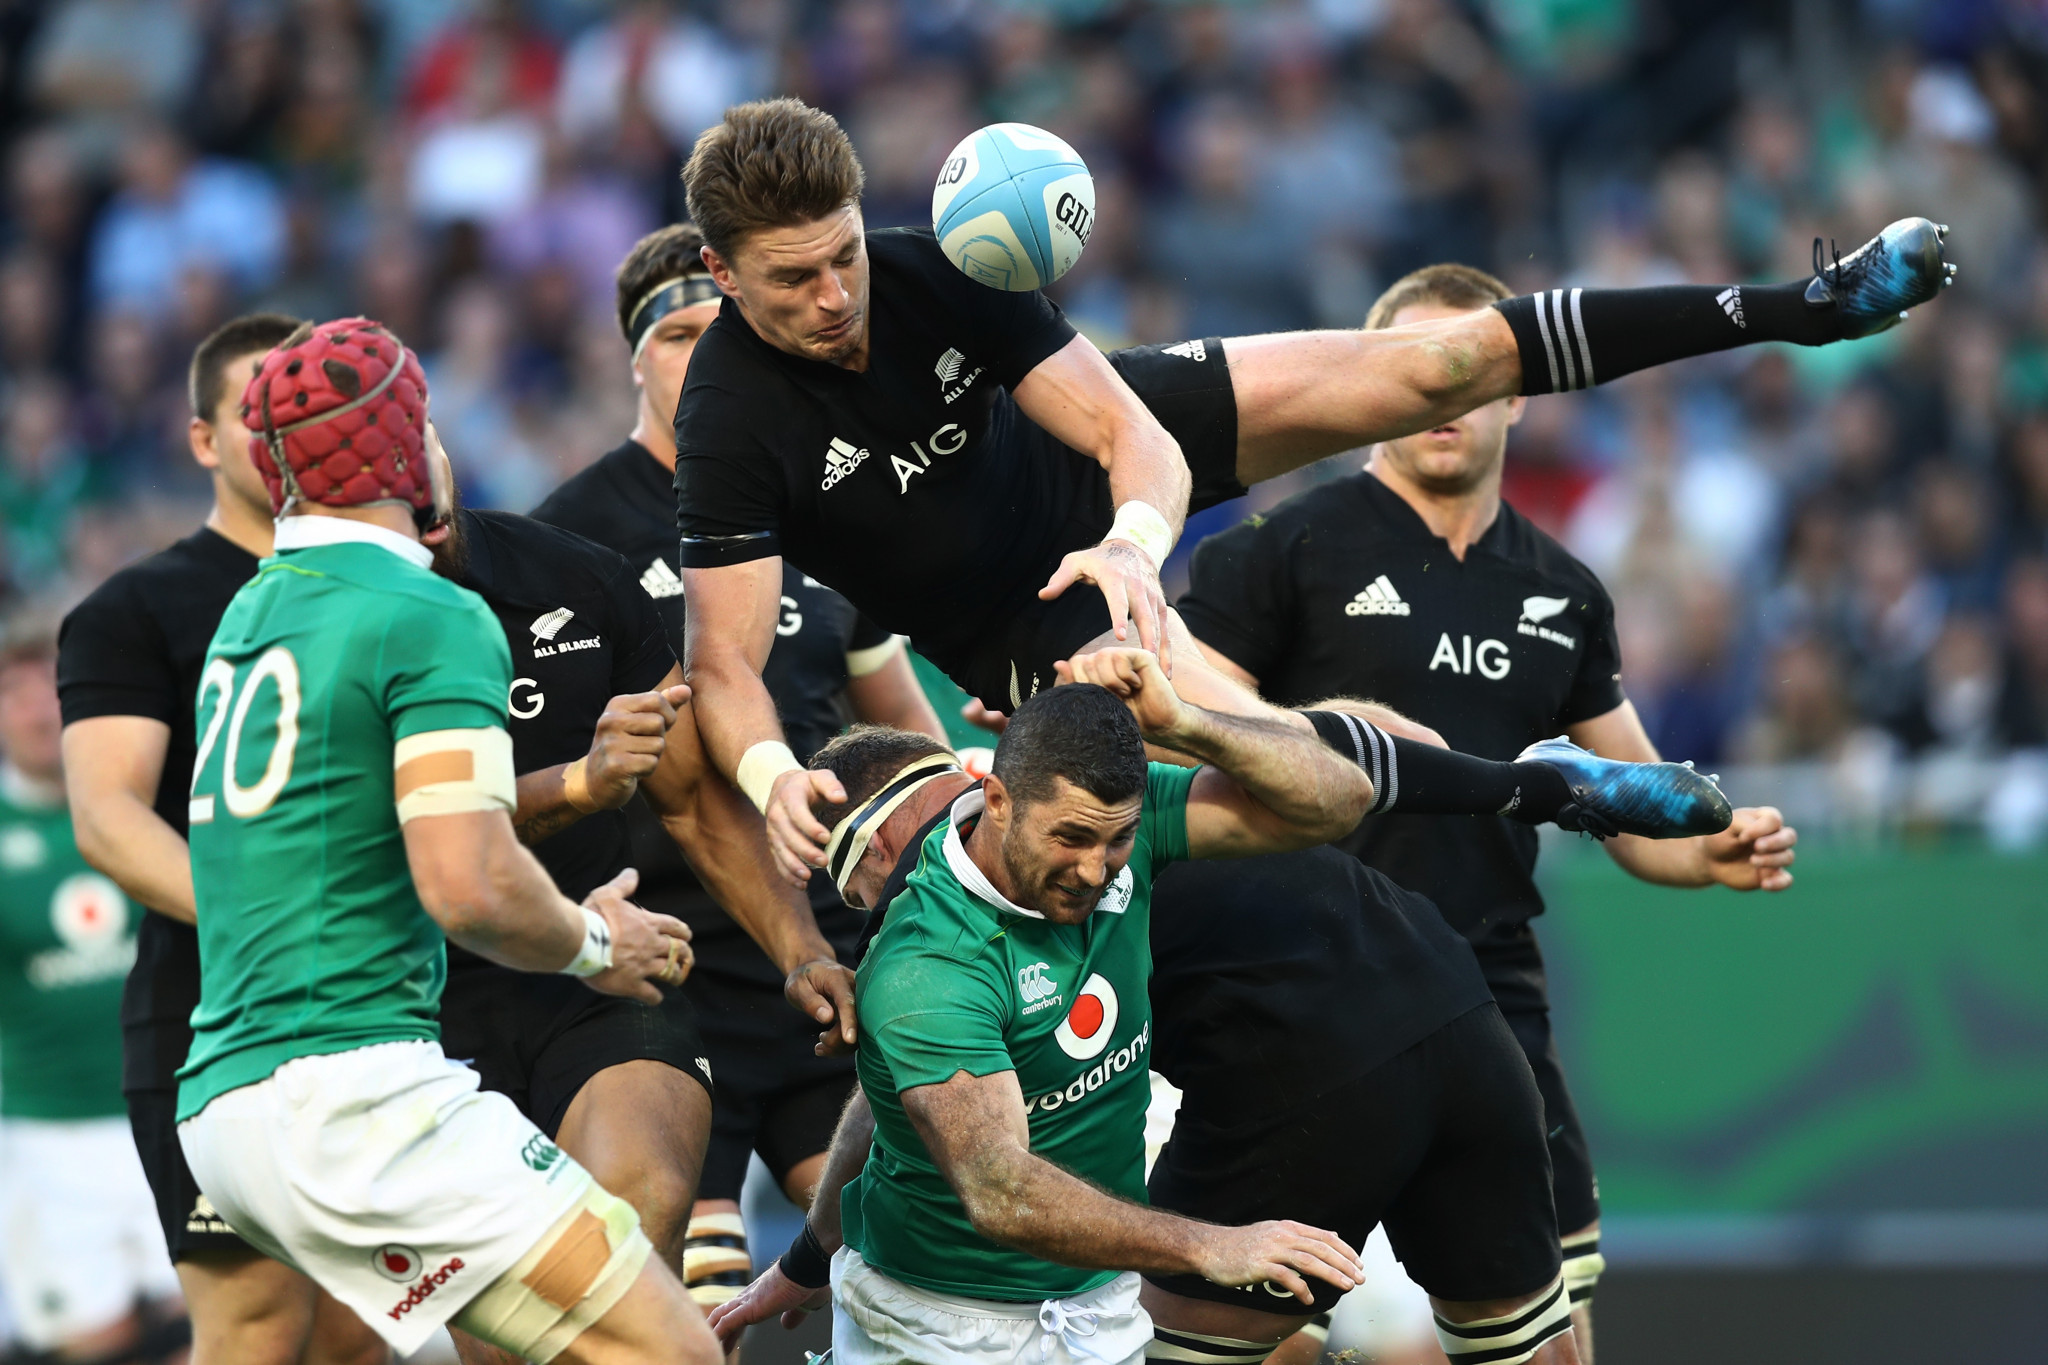 Ireland's first-ever win against New Zealand came in Chicago - and the city could well host matches as part of the 2031 Rugby World Cup as the United States is entering into exclusive dialogue with World Rugby on the tournament ©Getty Images